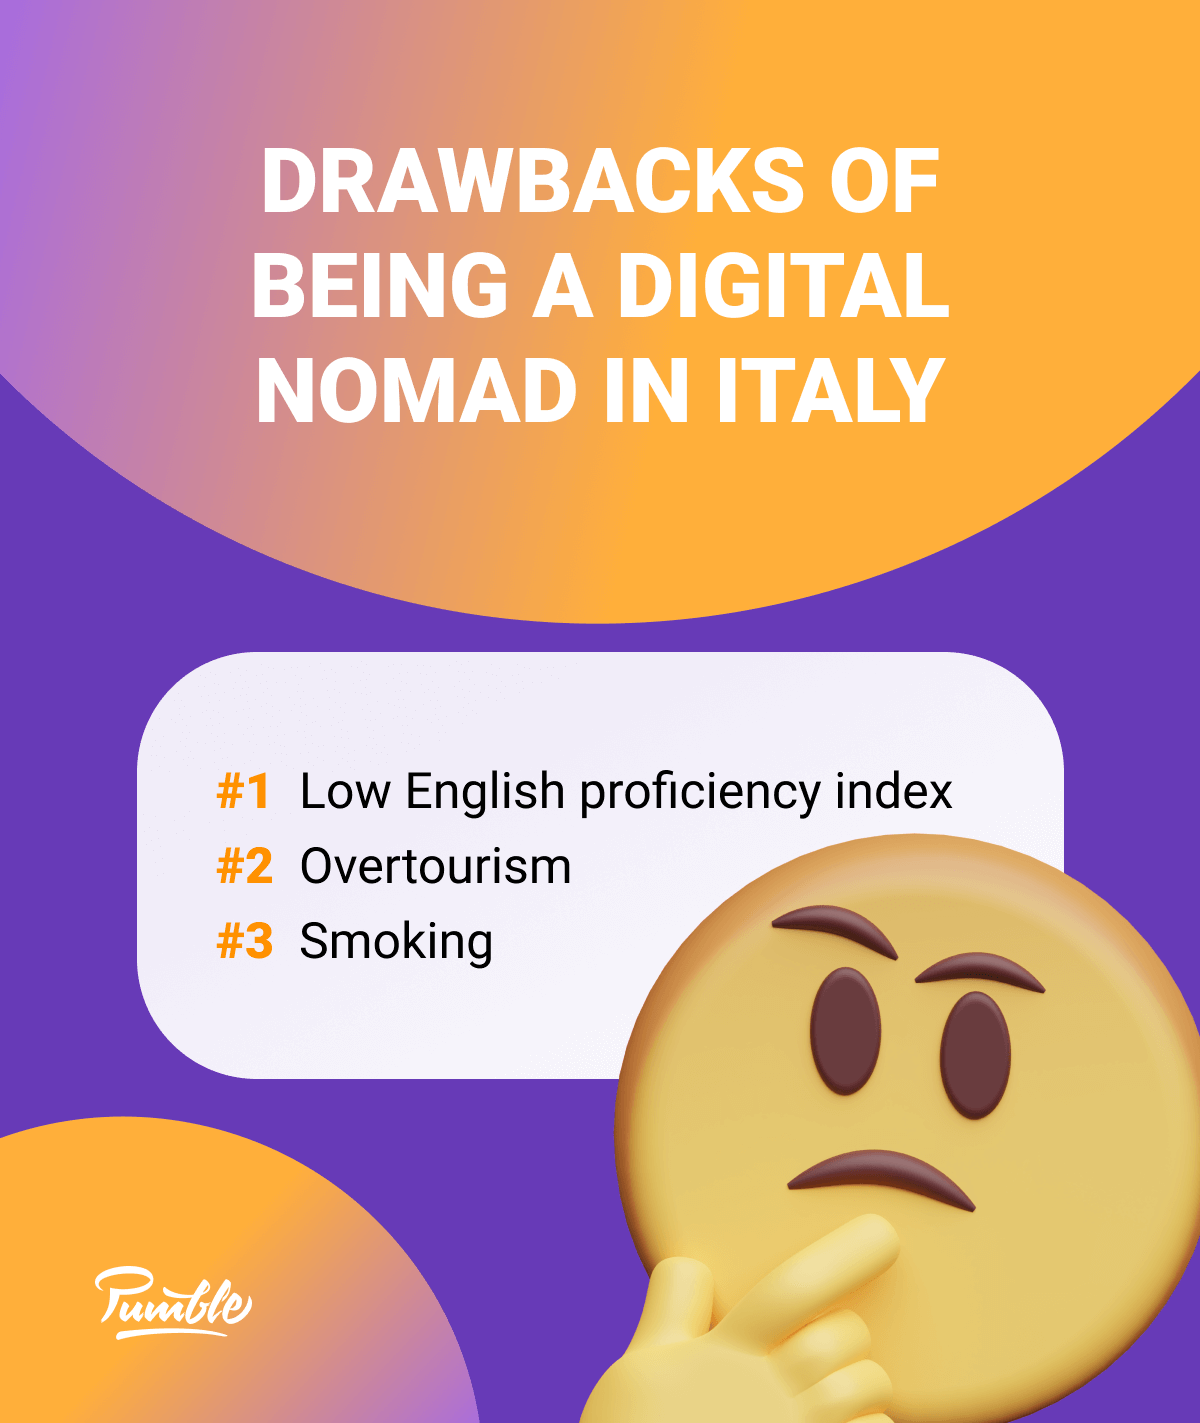 Drawbacks of being a digital nomad in Italy